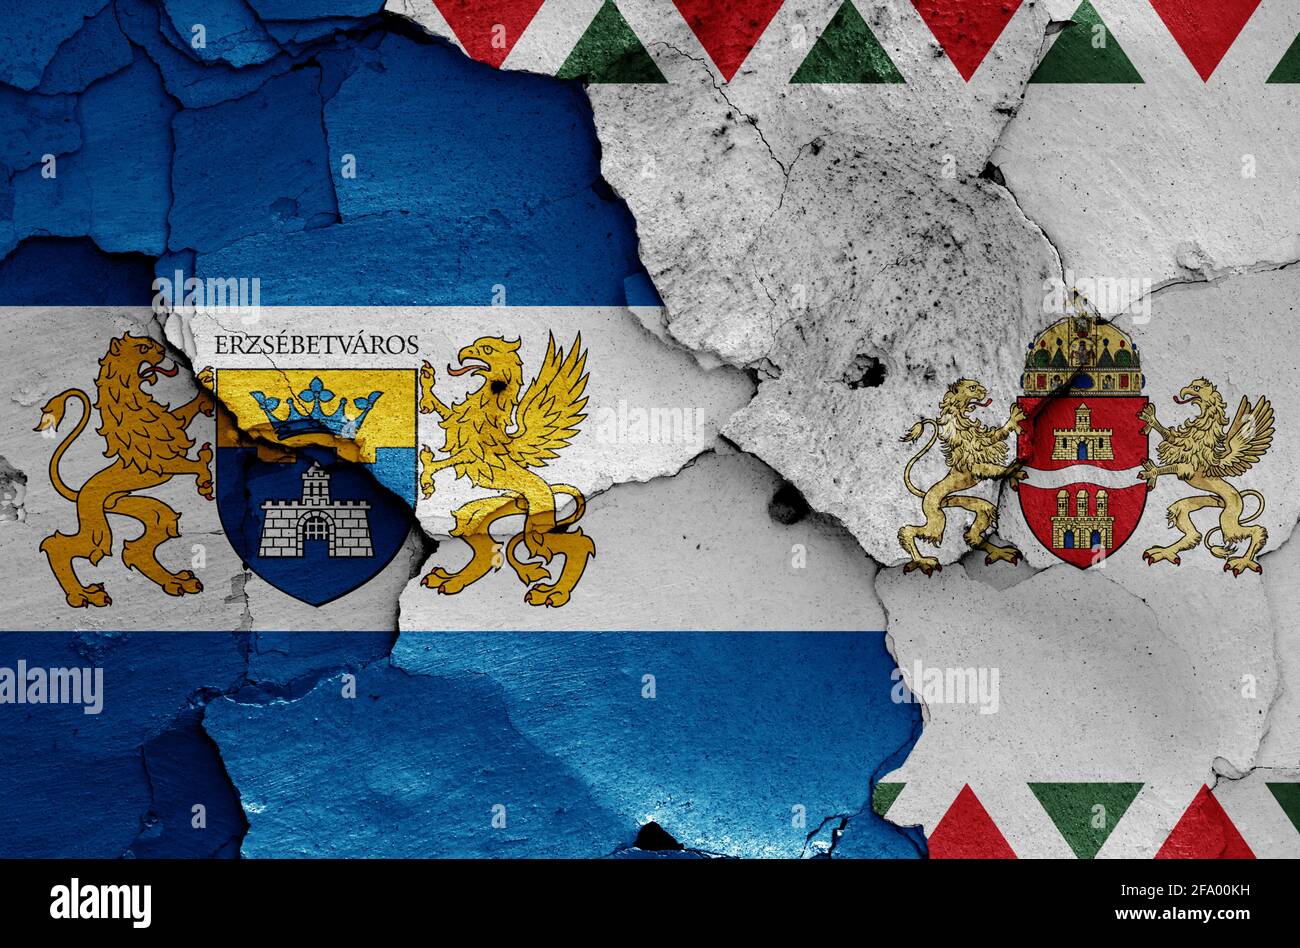 flags of District VII. (Erzsebetvaros) and Budapest painted on cracked wall Stock Photo